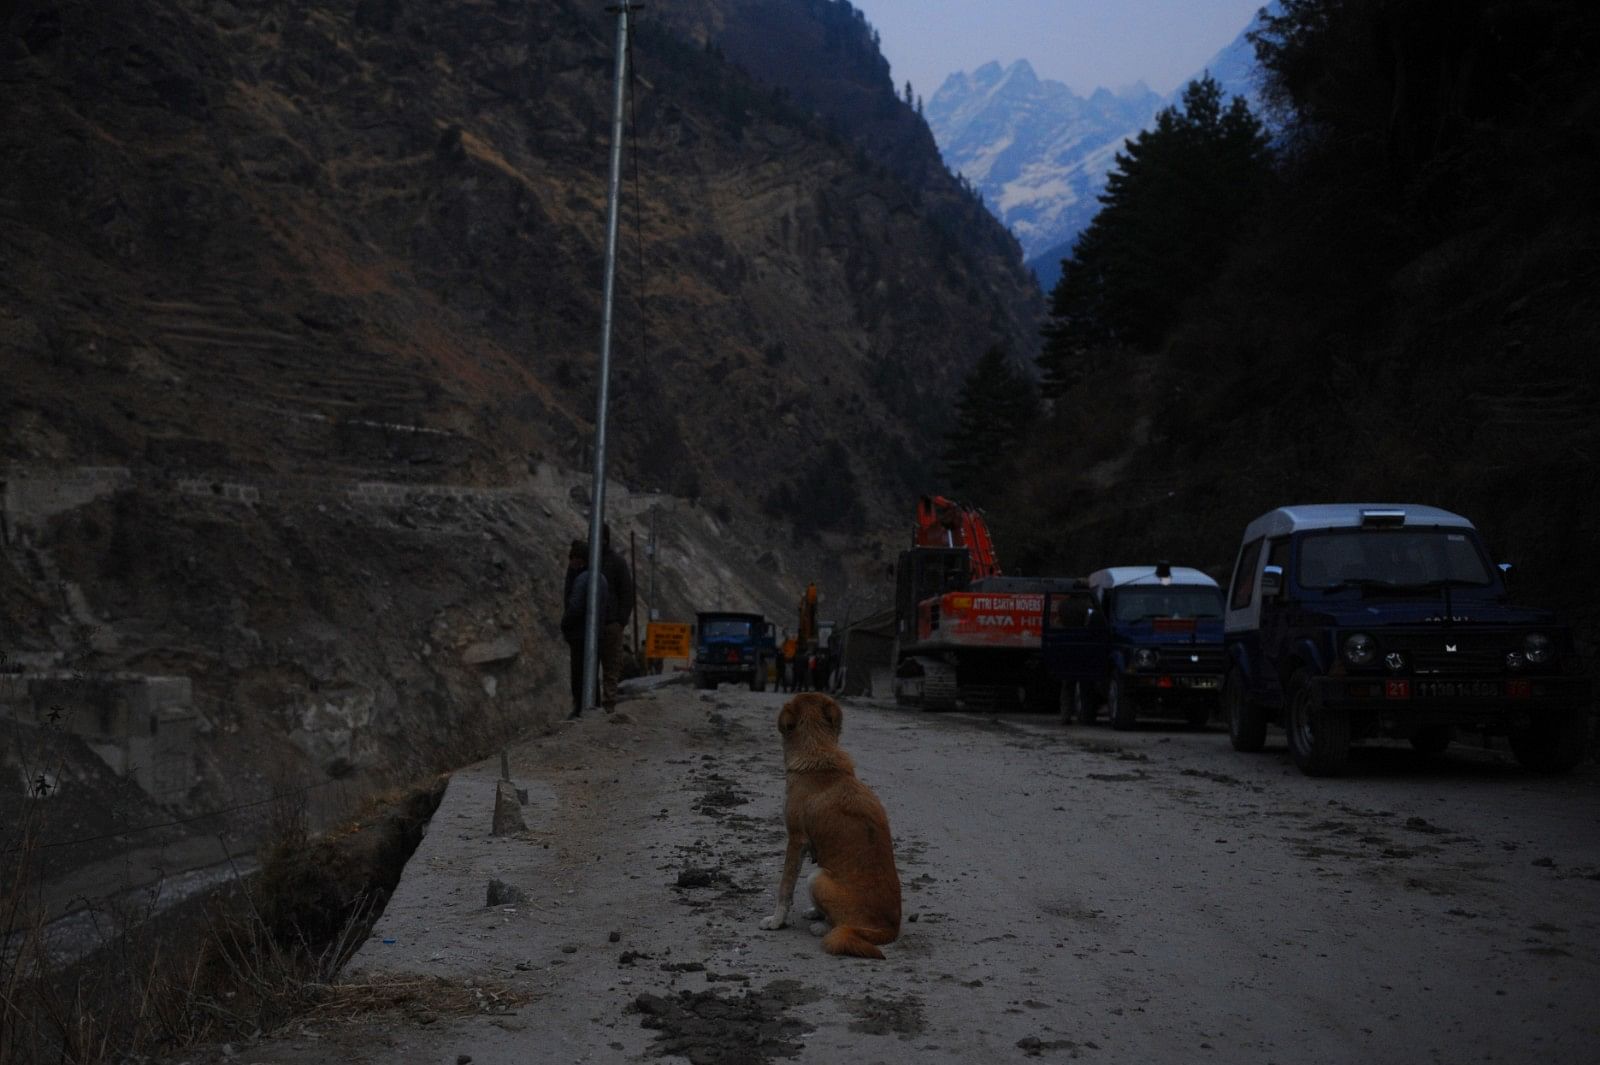 The Bhutia dog watches near Raini village has been unable to leave this spot even six days after the deluge washed away her puppies. | Photo: Suraj Singh Bisht/ThePrint